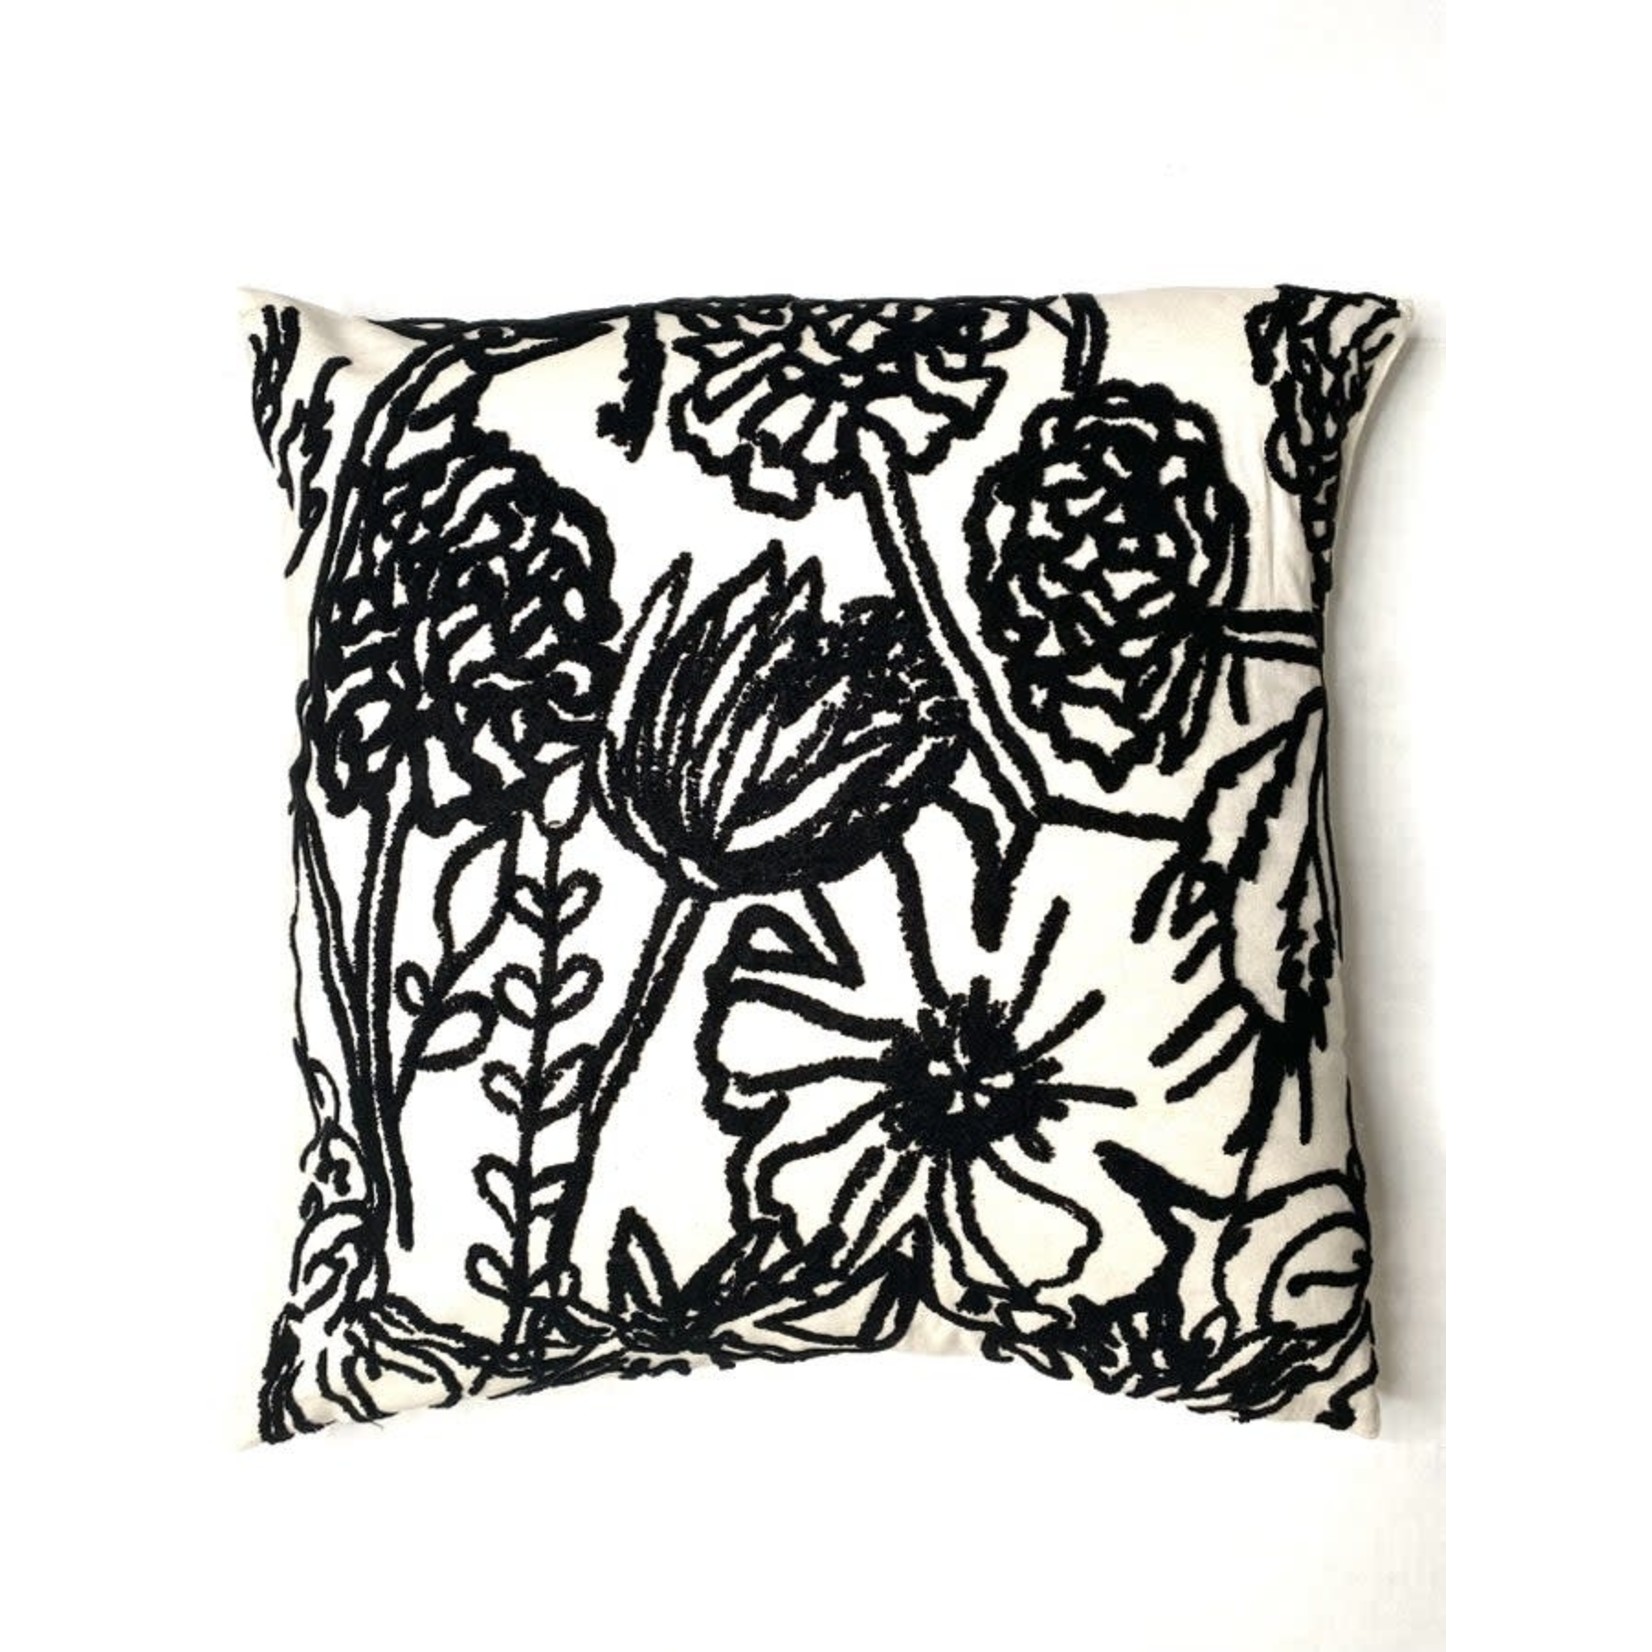 20" Sq Embroidered Floral Pillow CR/BK